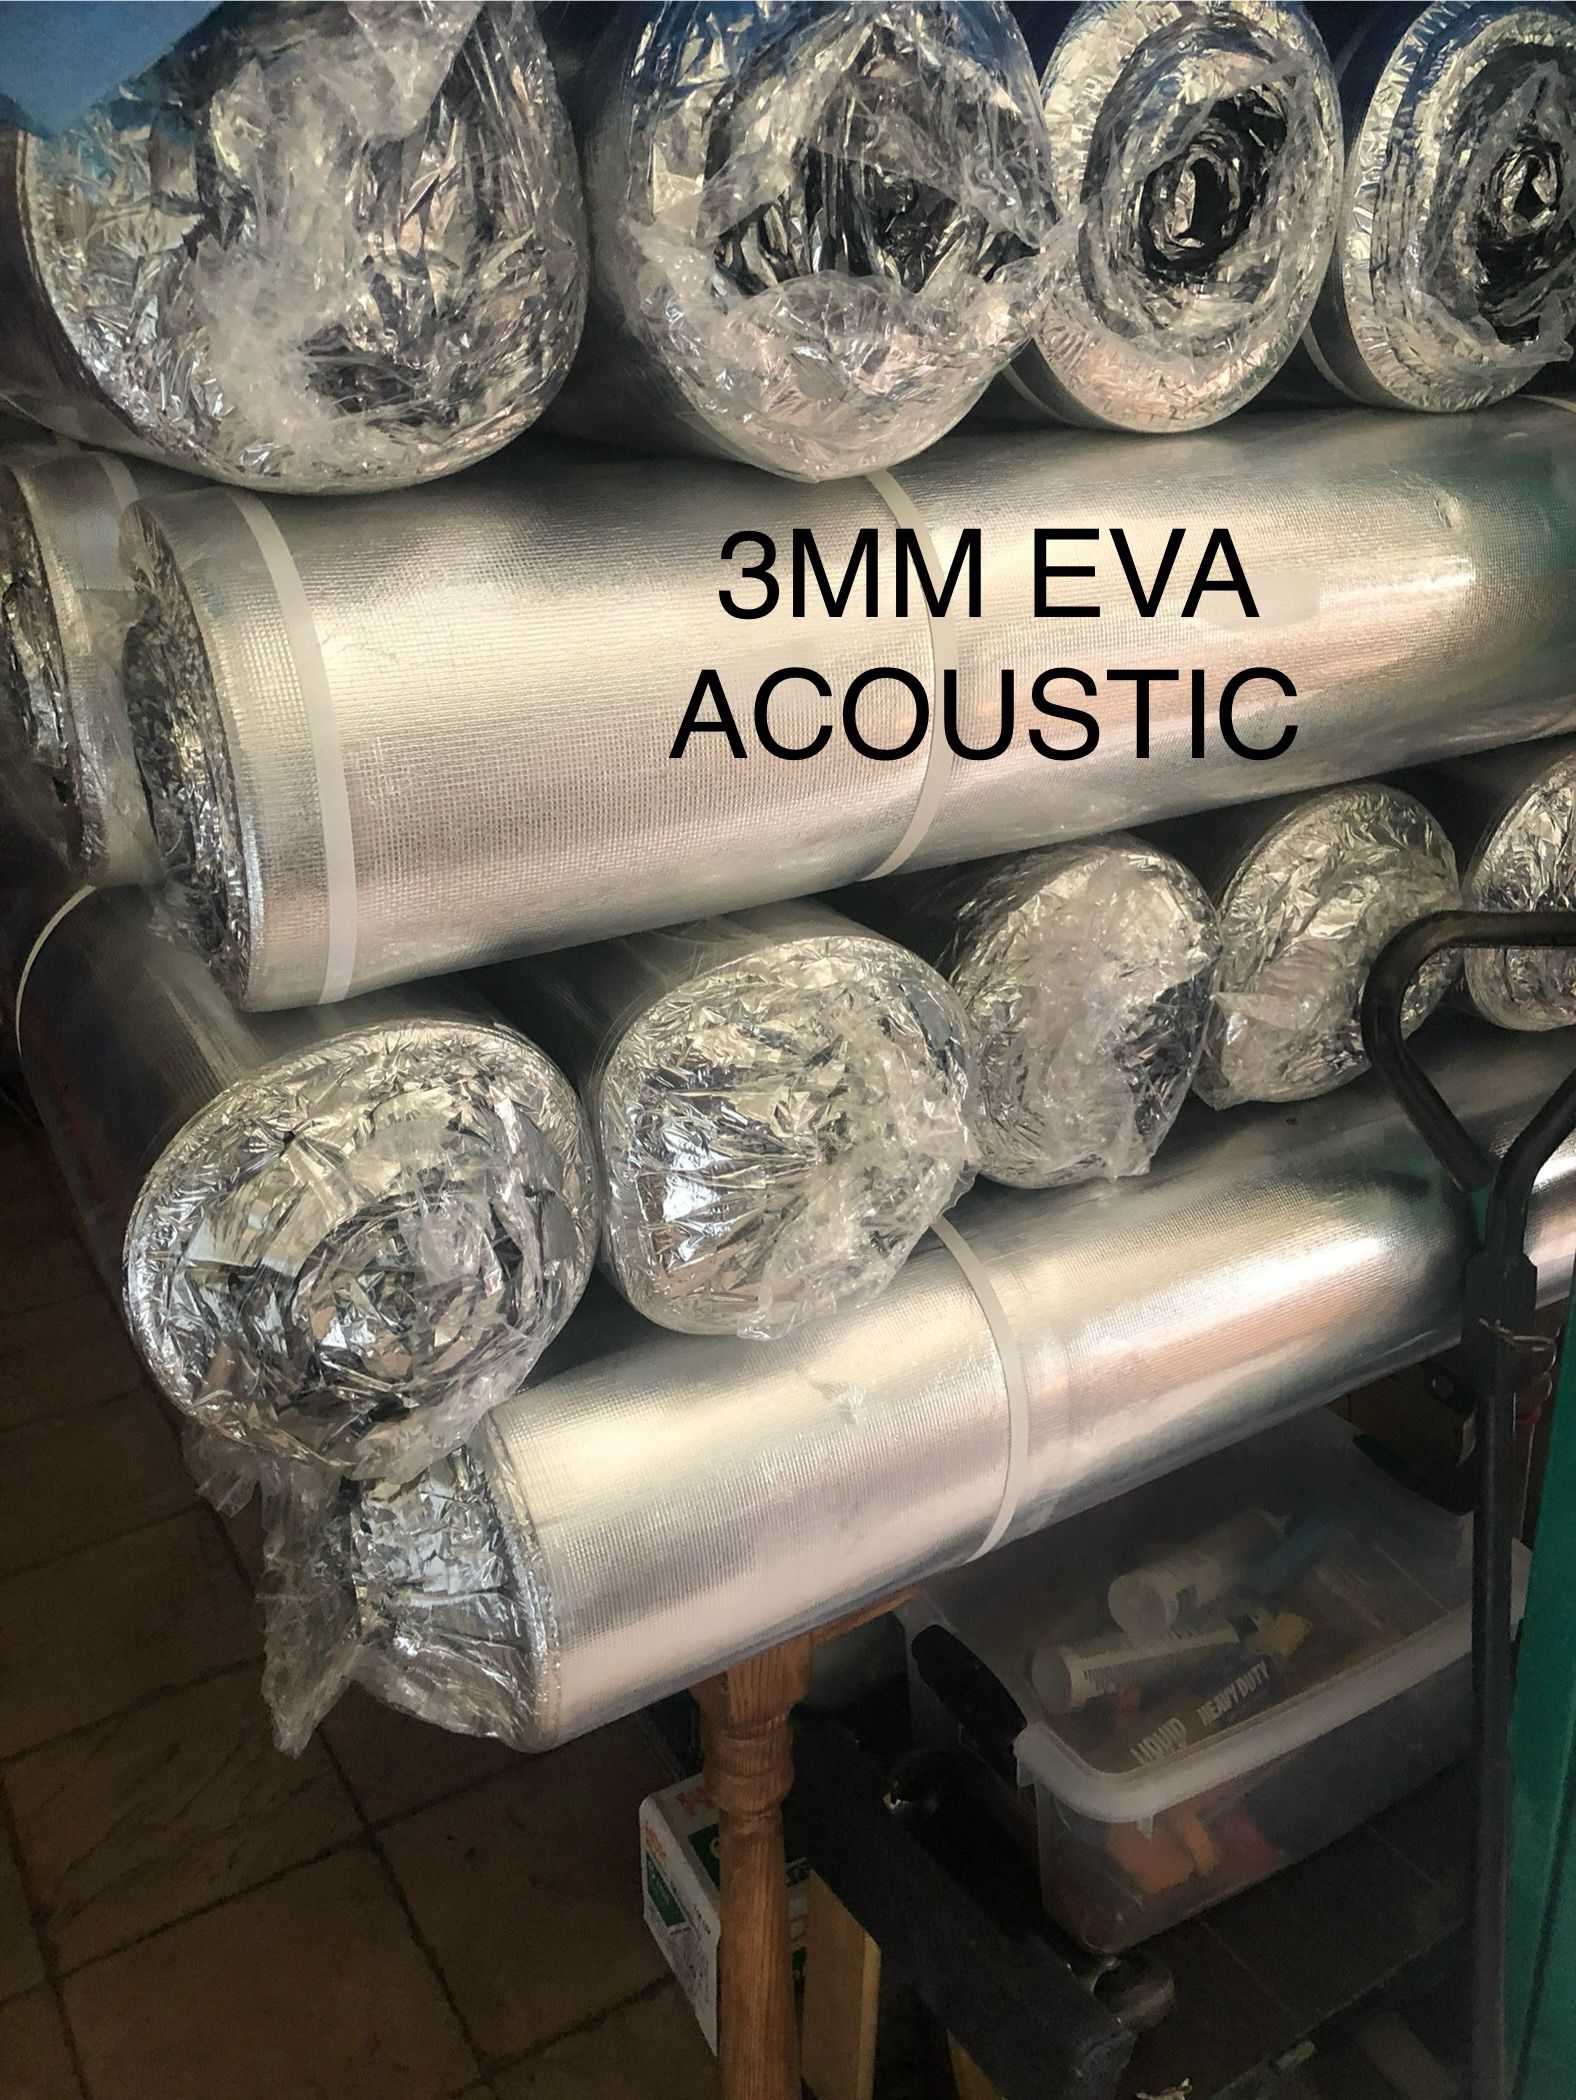 SUPER DUTY 3 MM EVA RUBBER ACOUSTIC SOUND BARRIER UNDERLAY PAD FOR ALL TYPES OF FLOORING .GREAT THERMAL AND MOISTURE BARRIER. 200 sf /ROLL. GREAT FOR 